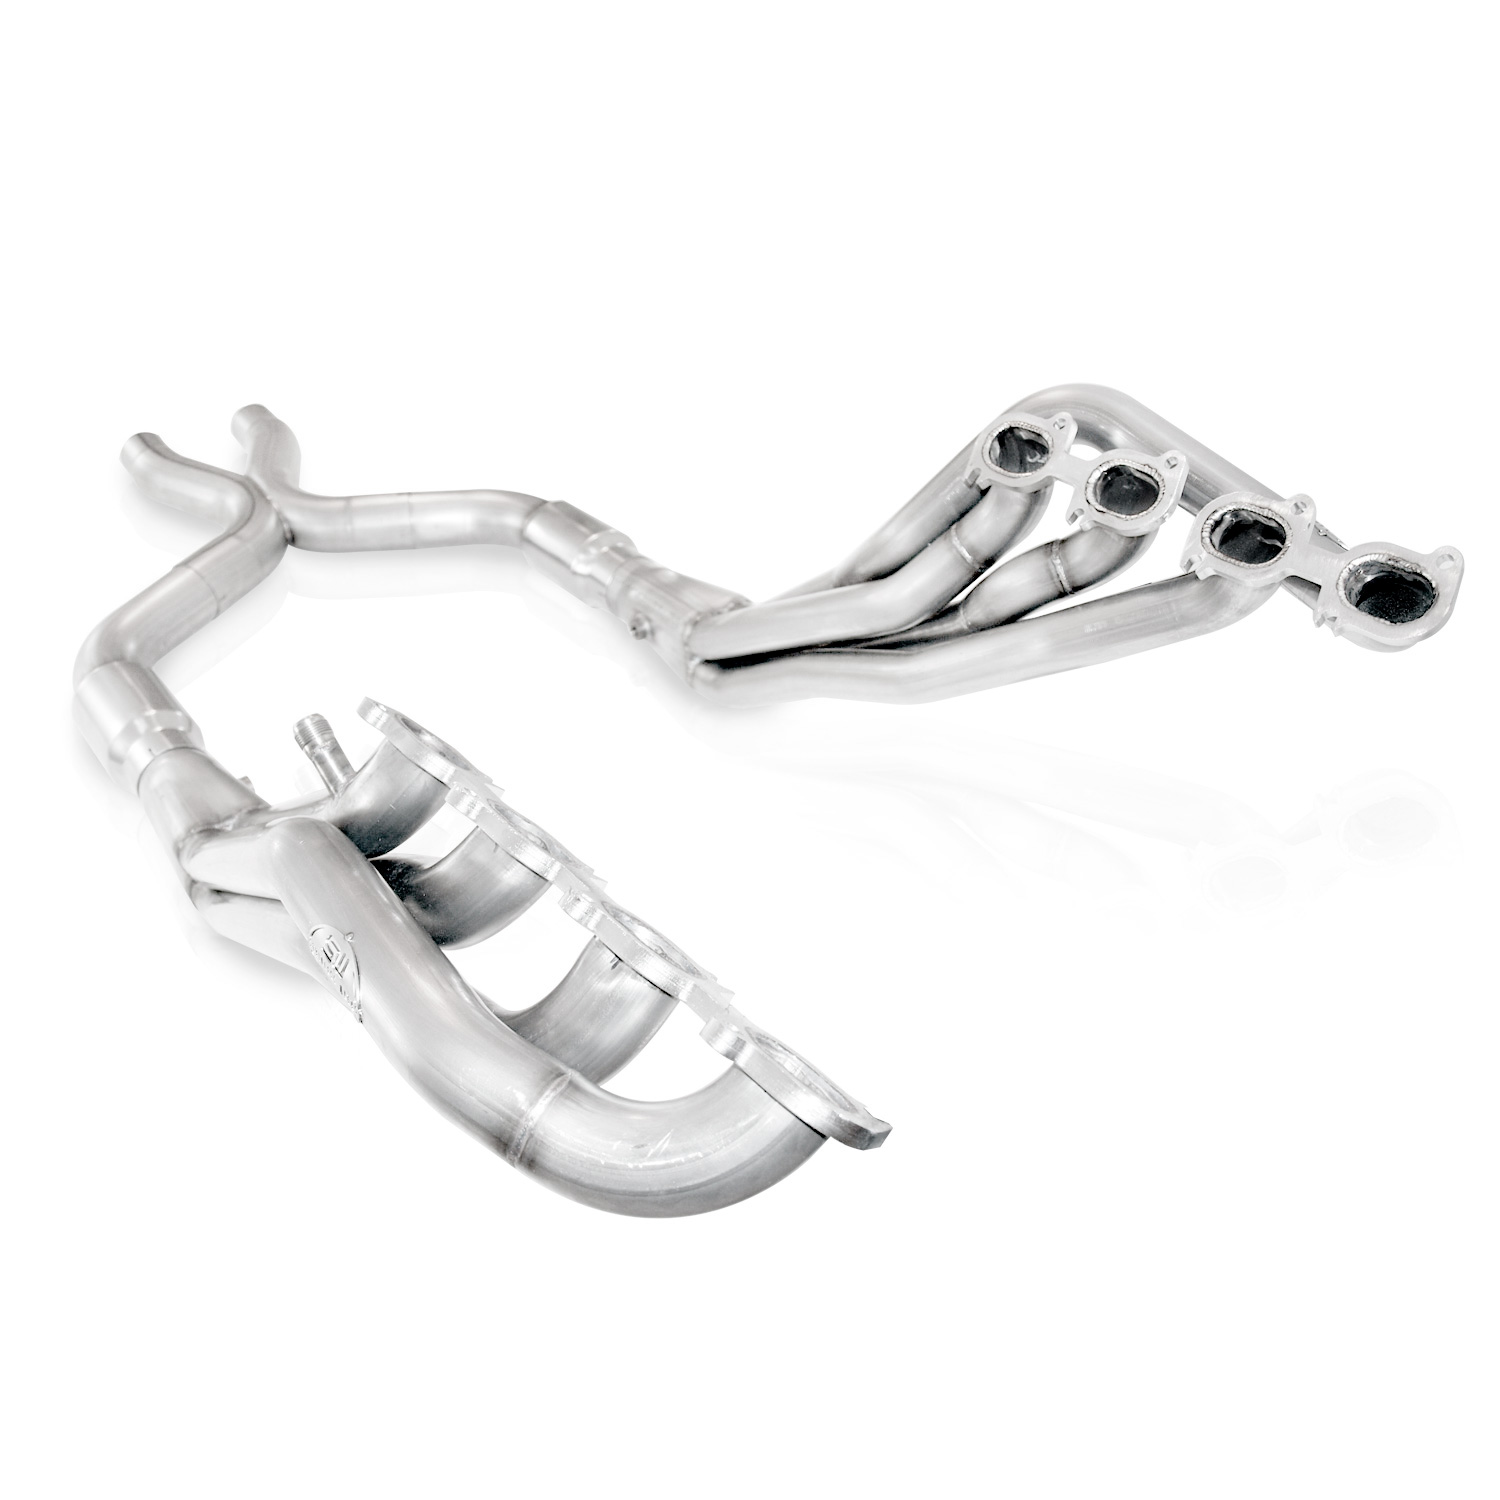 2011-2014 Mustang Shelby GT500 5.4L, 5.8L SW Headers 1-7/8" With Catted Leads Factory & Performance Connect